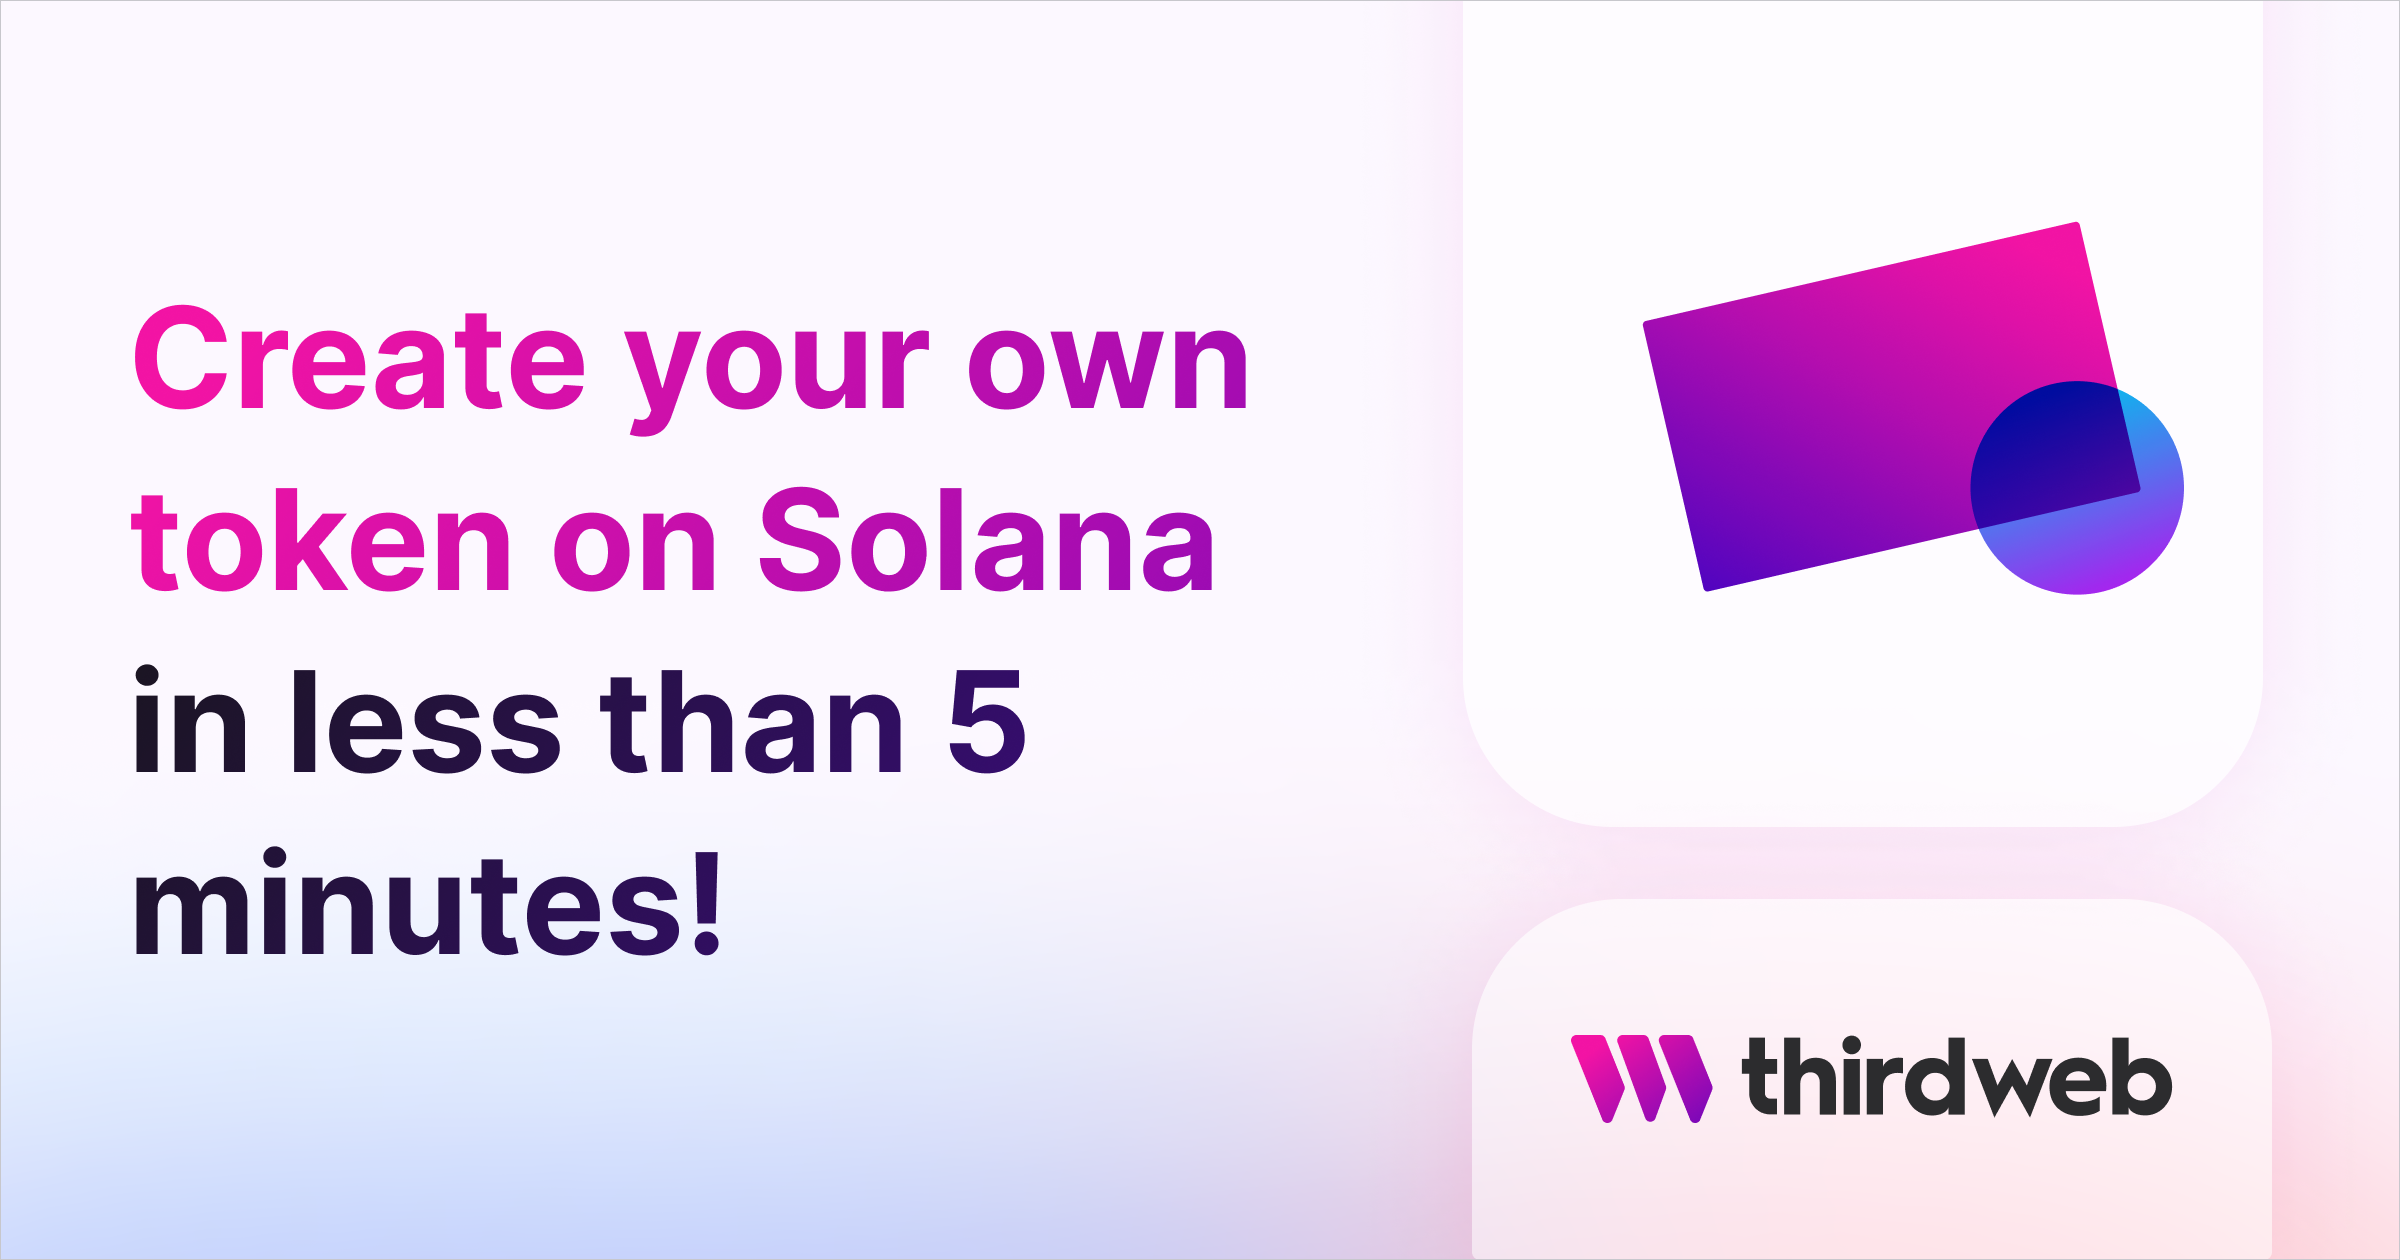 Create your own token on Solana in less than 5 minutes! - thirdweb Guides